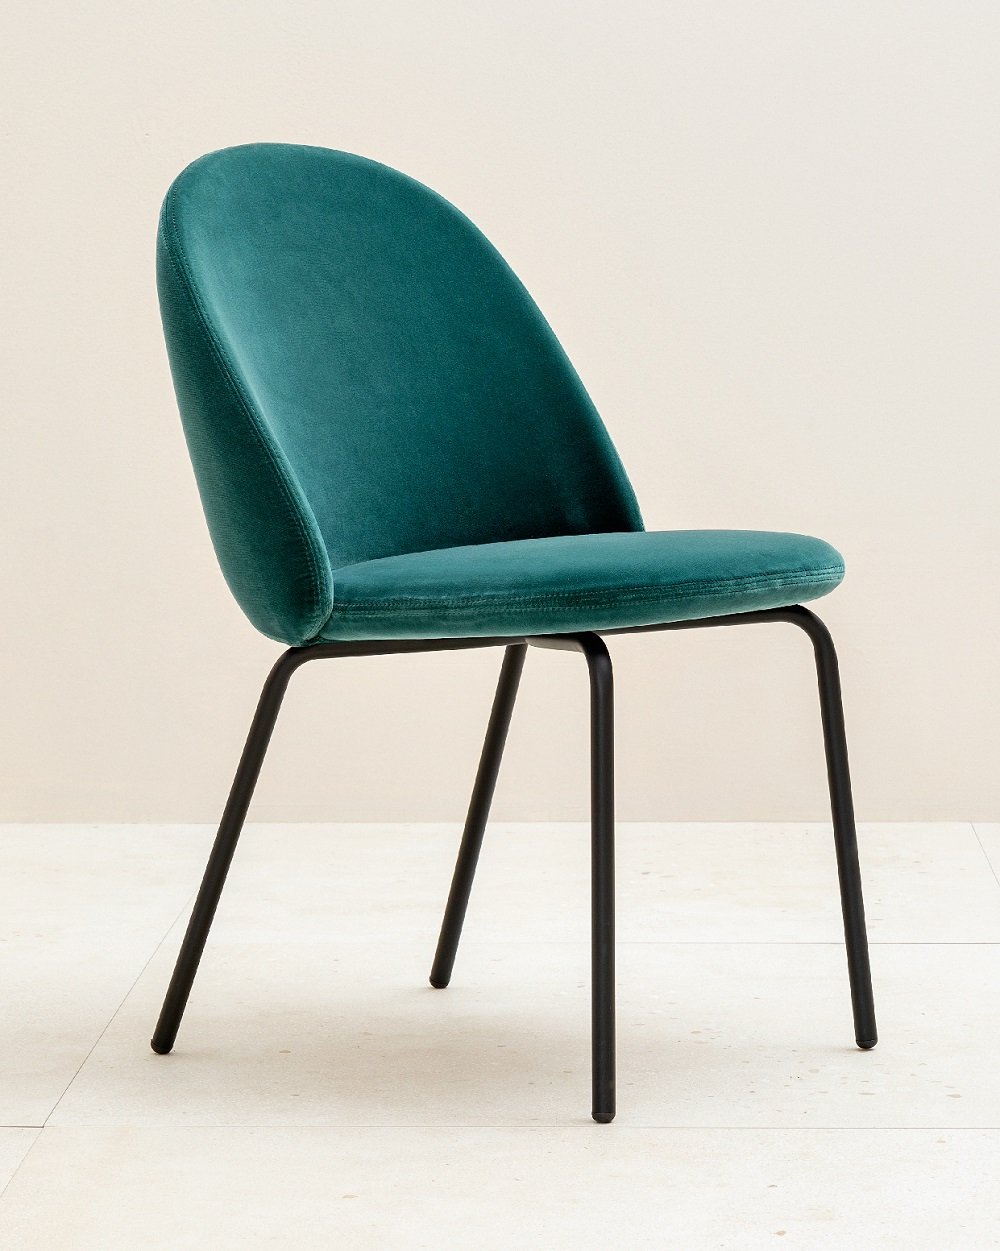 Iola Dining Chairs from Miniforms, designed by E-ggs